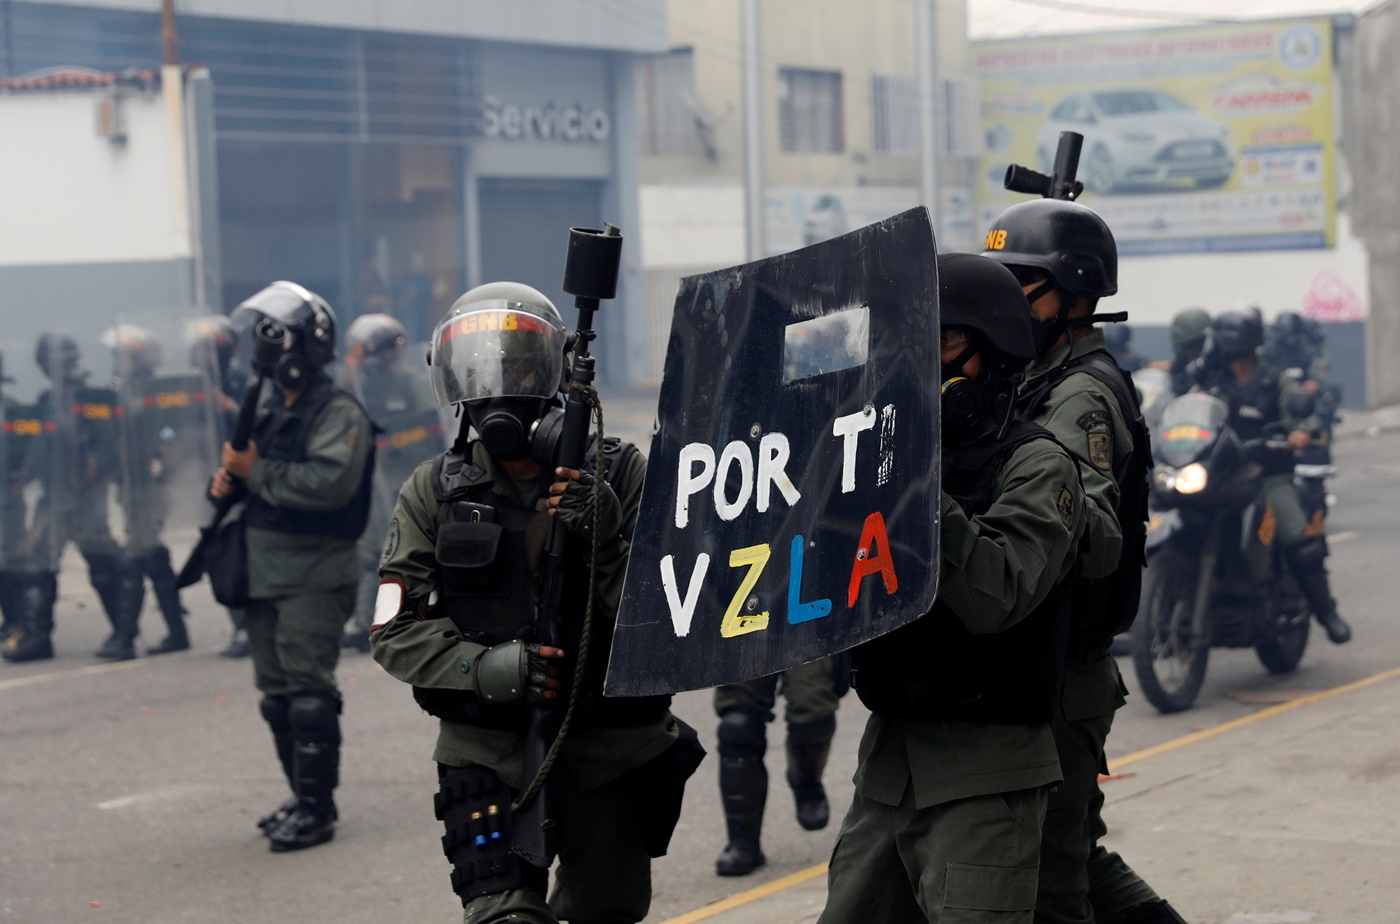 Riot police carrying a shield that reads, "For you Venezuela", take position while clashing with opposition supporters rallying against President Nicolas Maduro in Caracas, Venezuela May 3, 2017. REUTERS/Carlos Garcia Rawlins